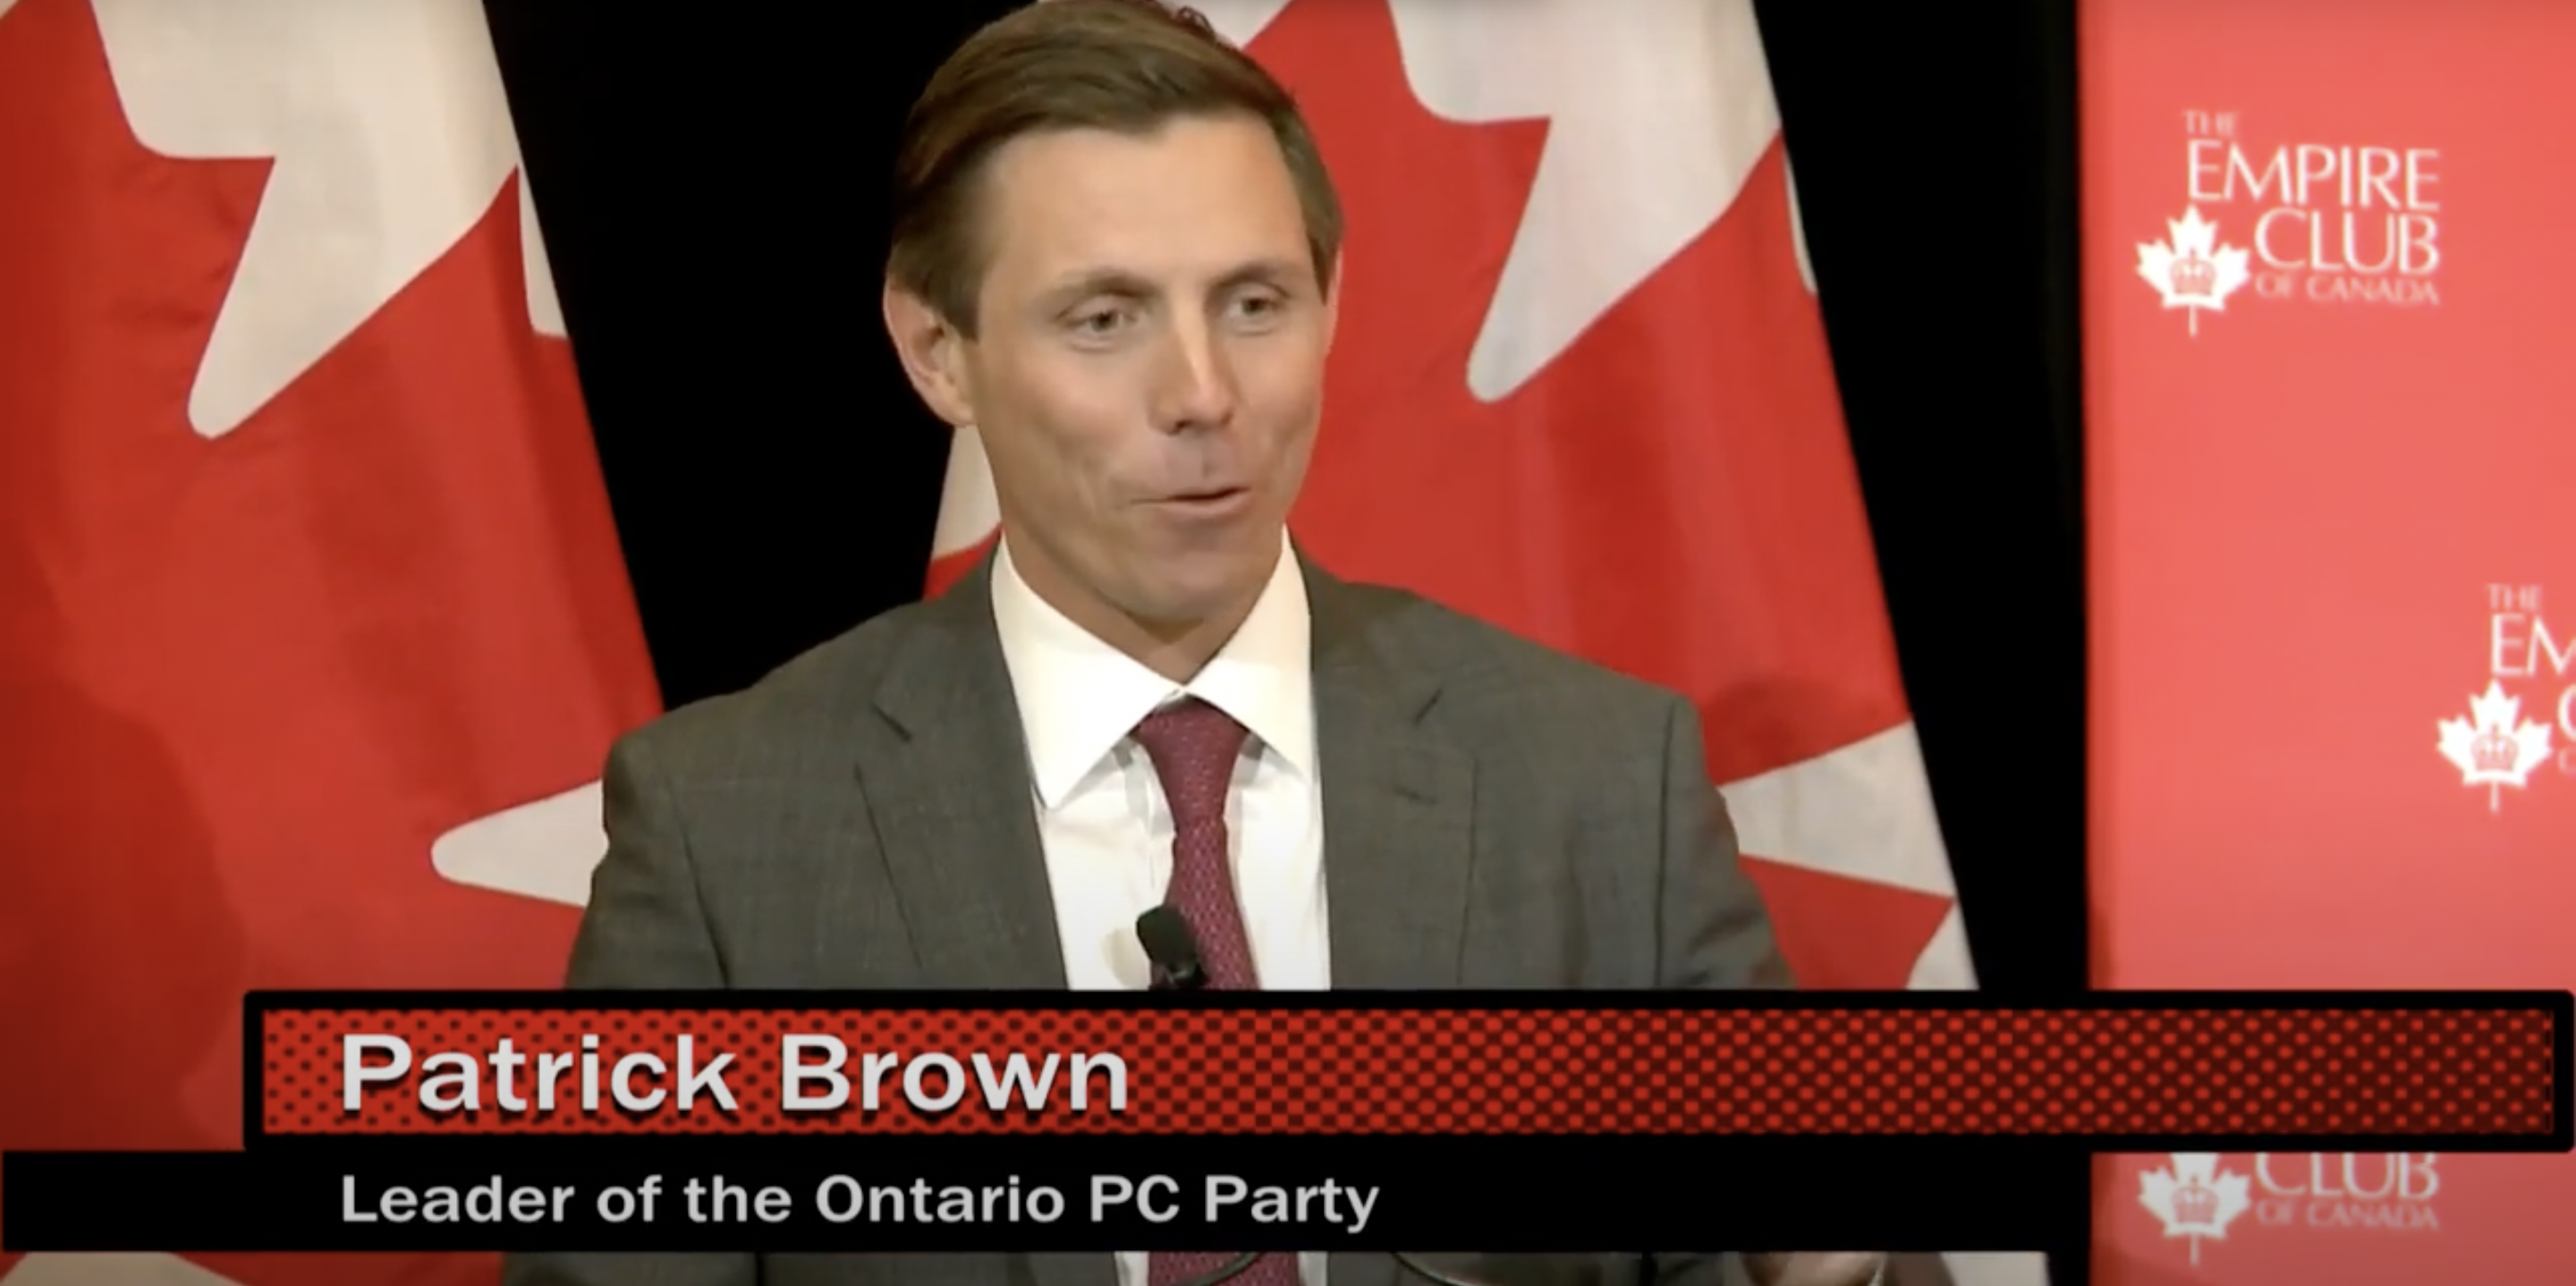 alt= A man, Patrick Brown, standing and speaking in front of Canadian flags